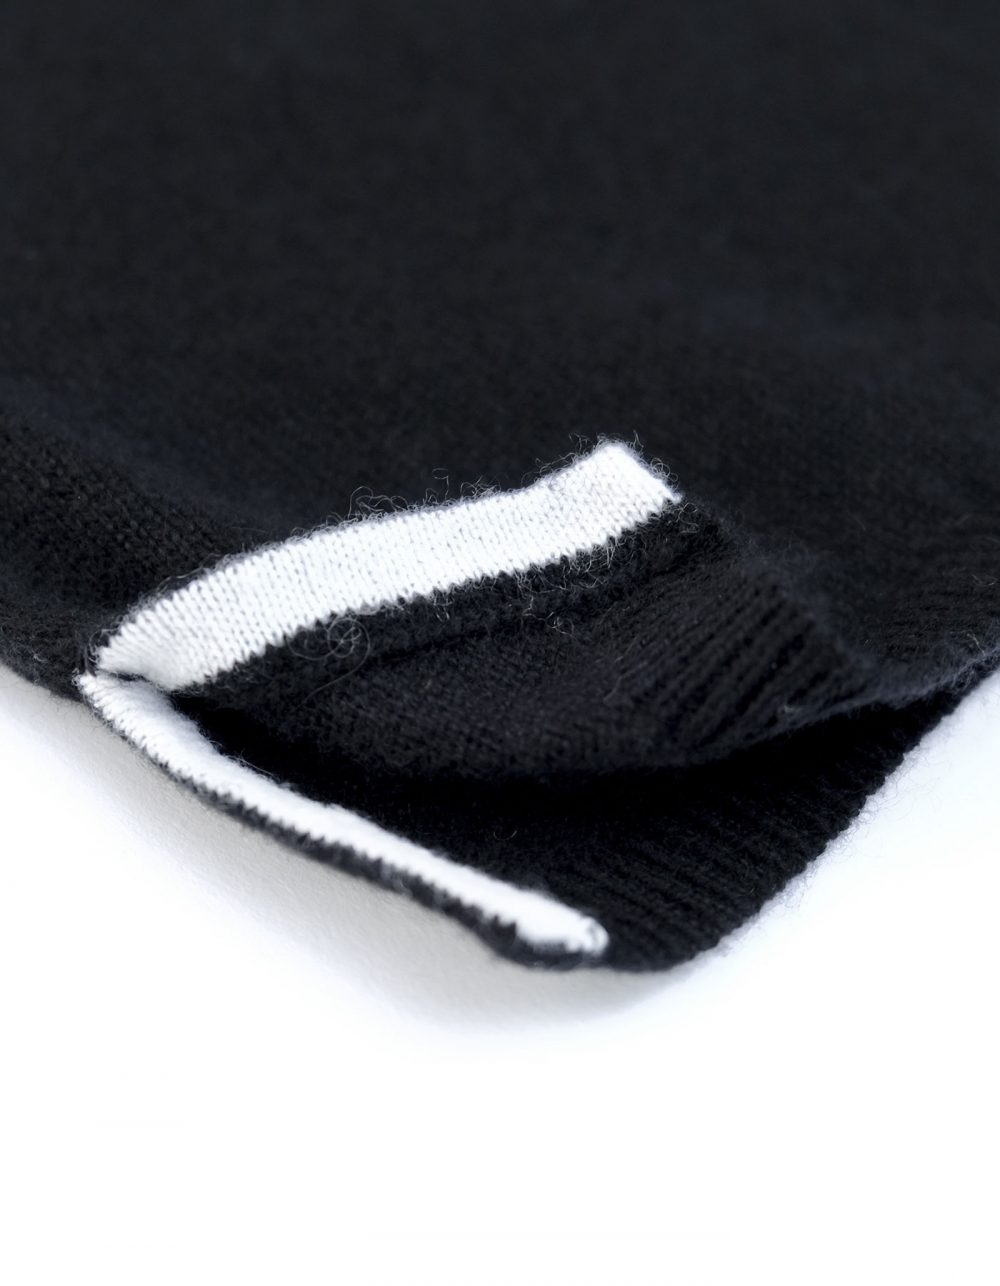 Hem close up of the malin darlin Darlin black cashmere jumper showing contrast and knit detail.